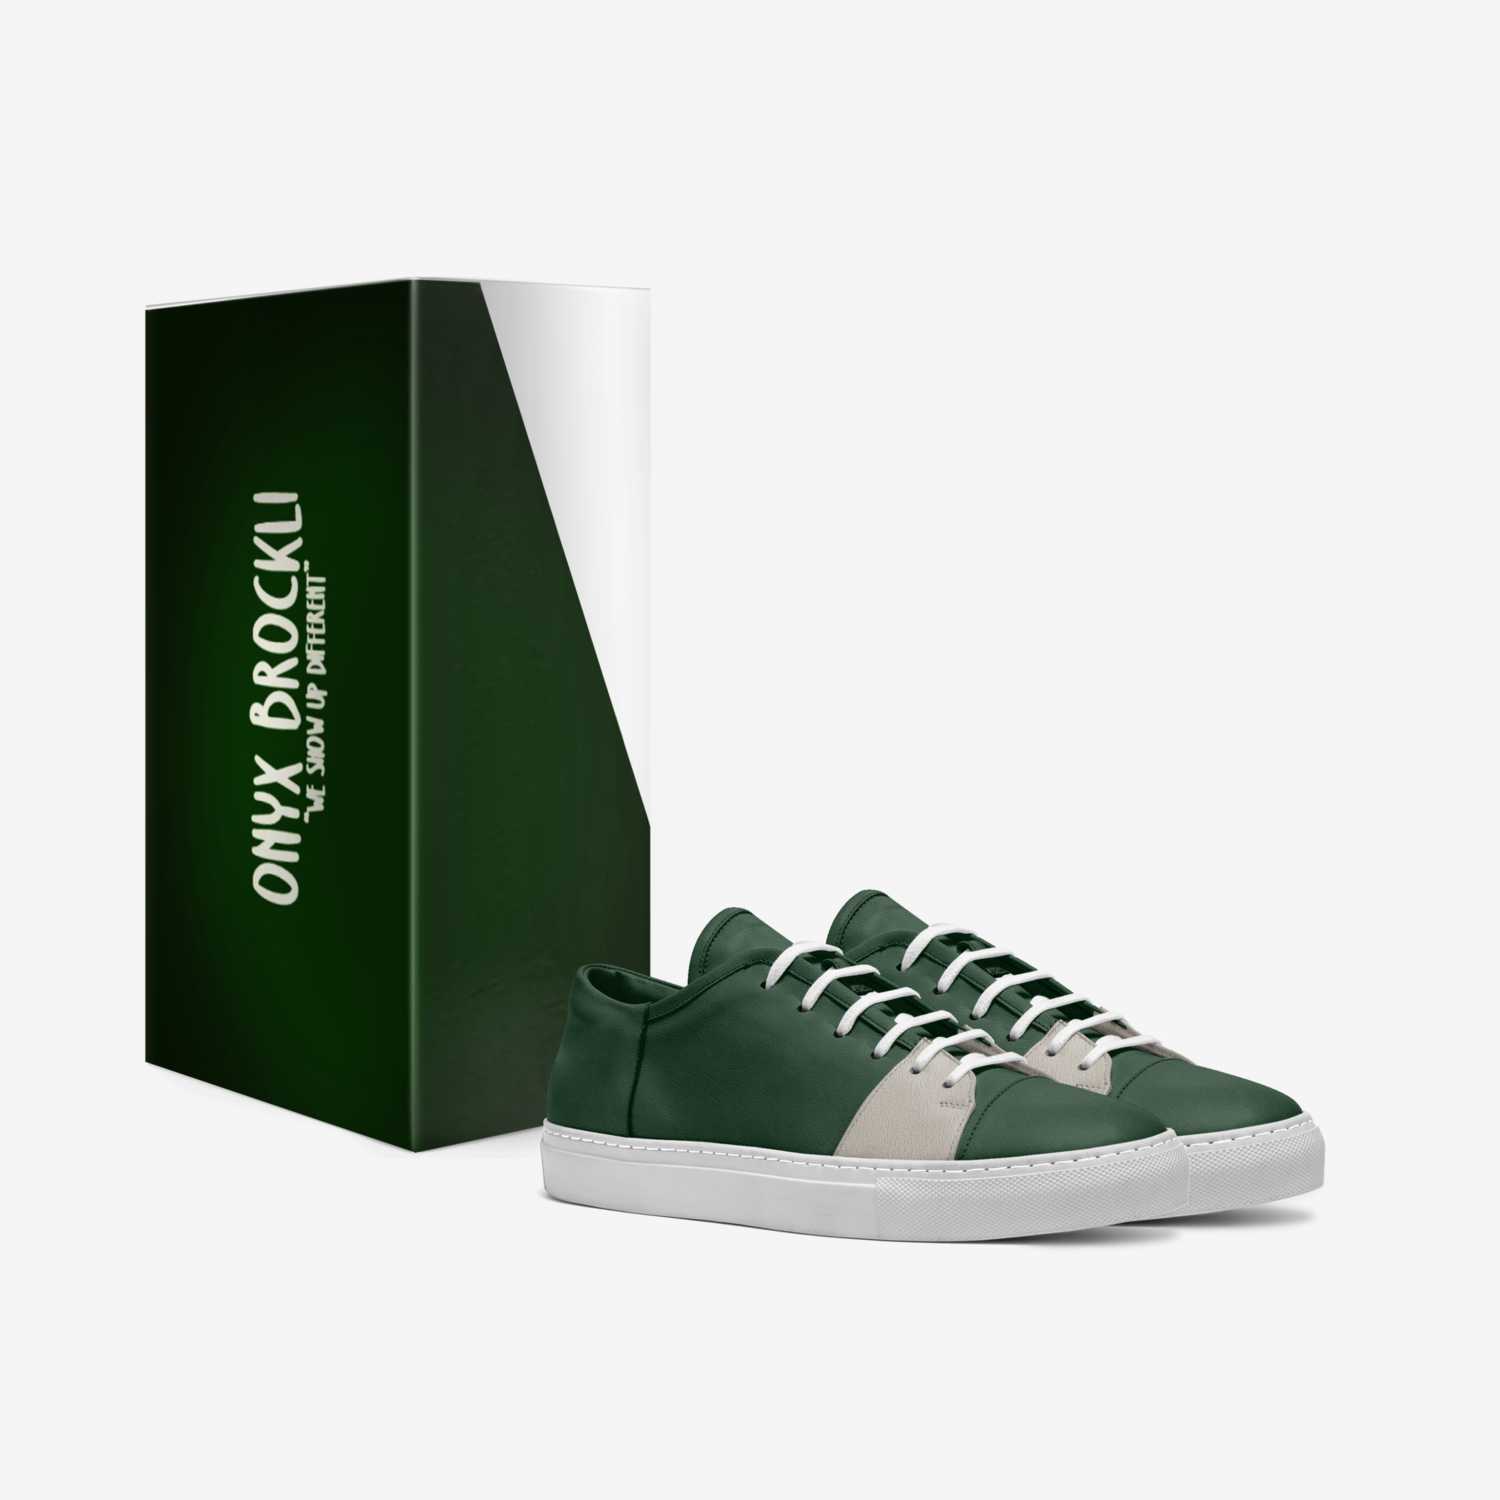 OB Classic custom made in Italy shoes by Onyx Brockli | Box view